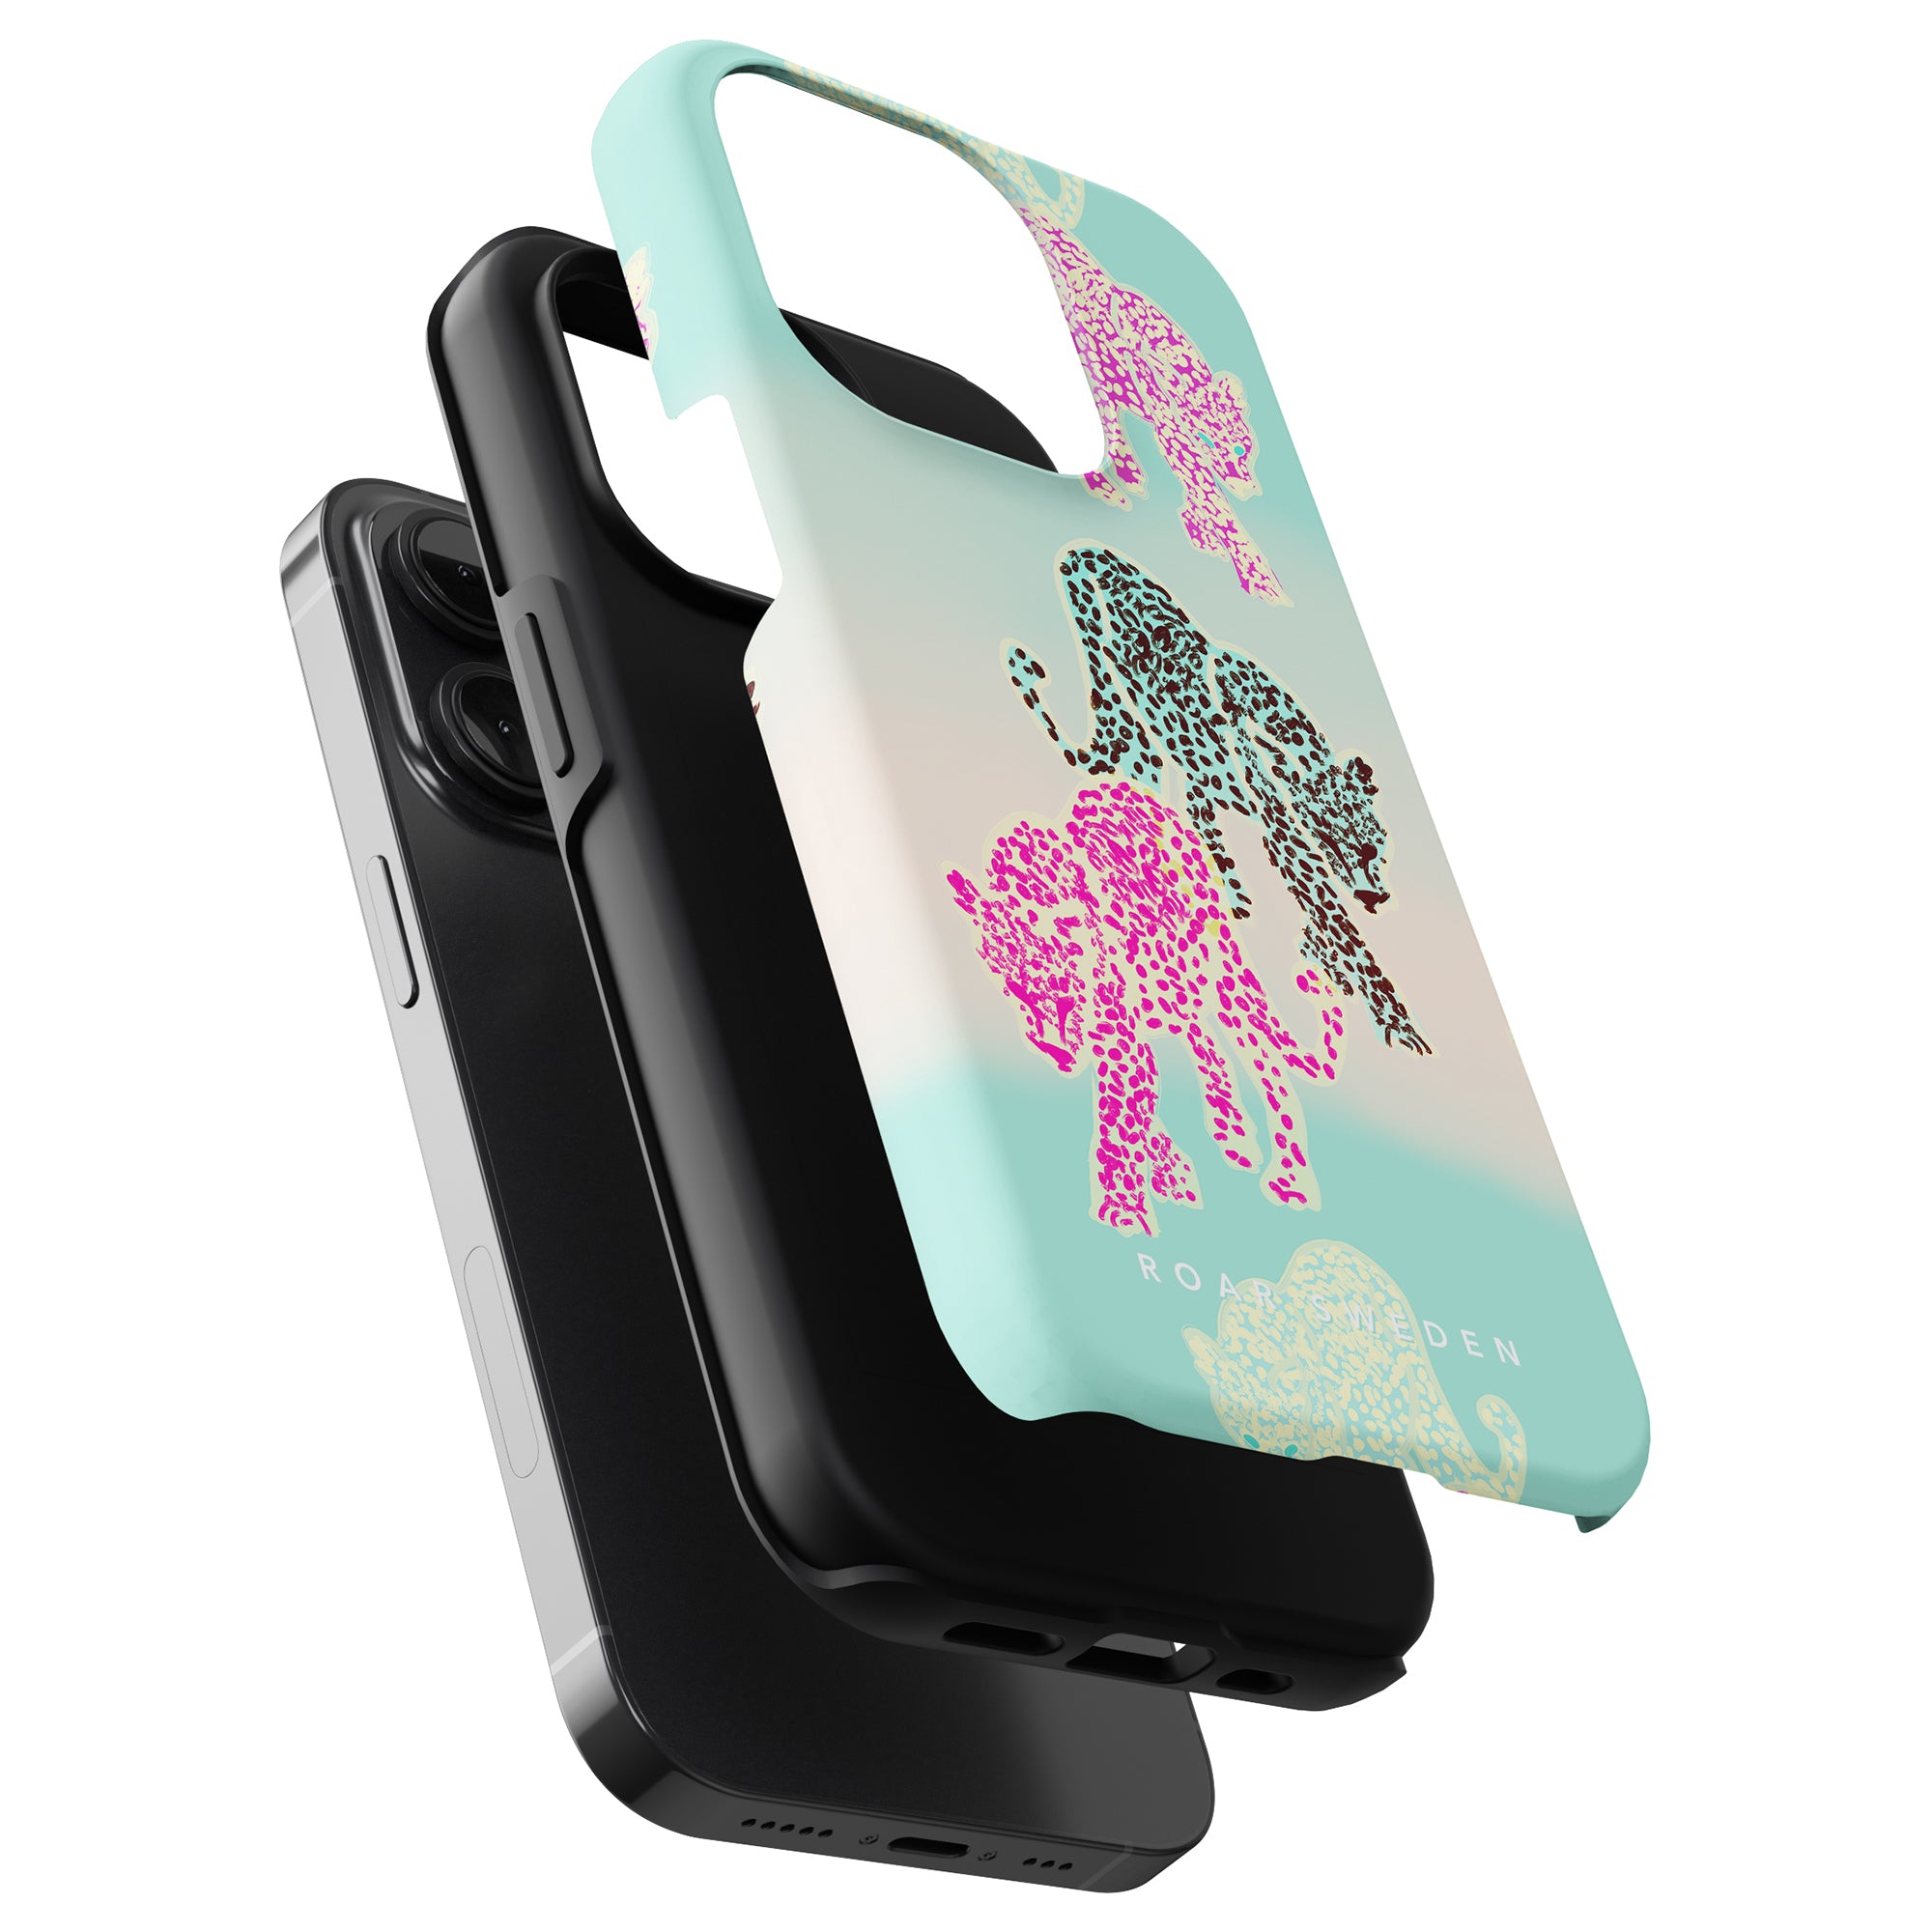 The Tame - Tough Case combines a modern design with robustness, offering an efficient protection for your mobile.